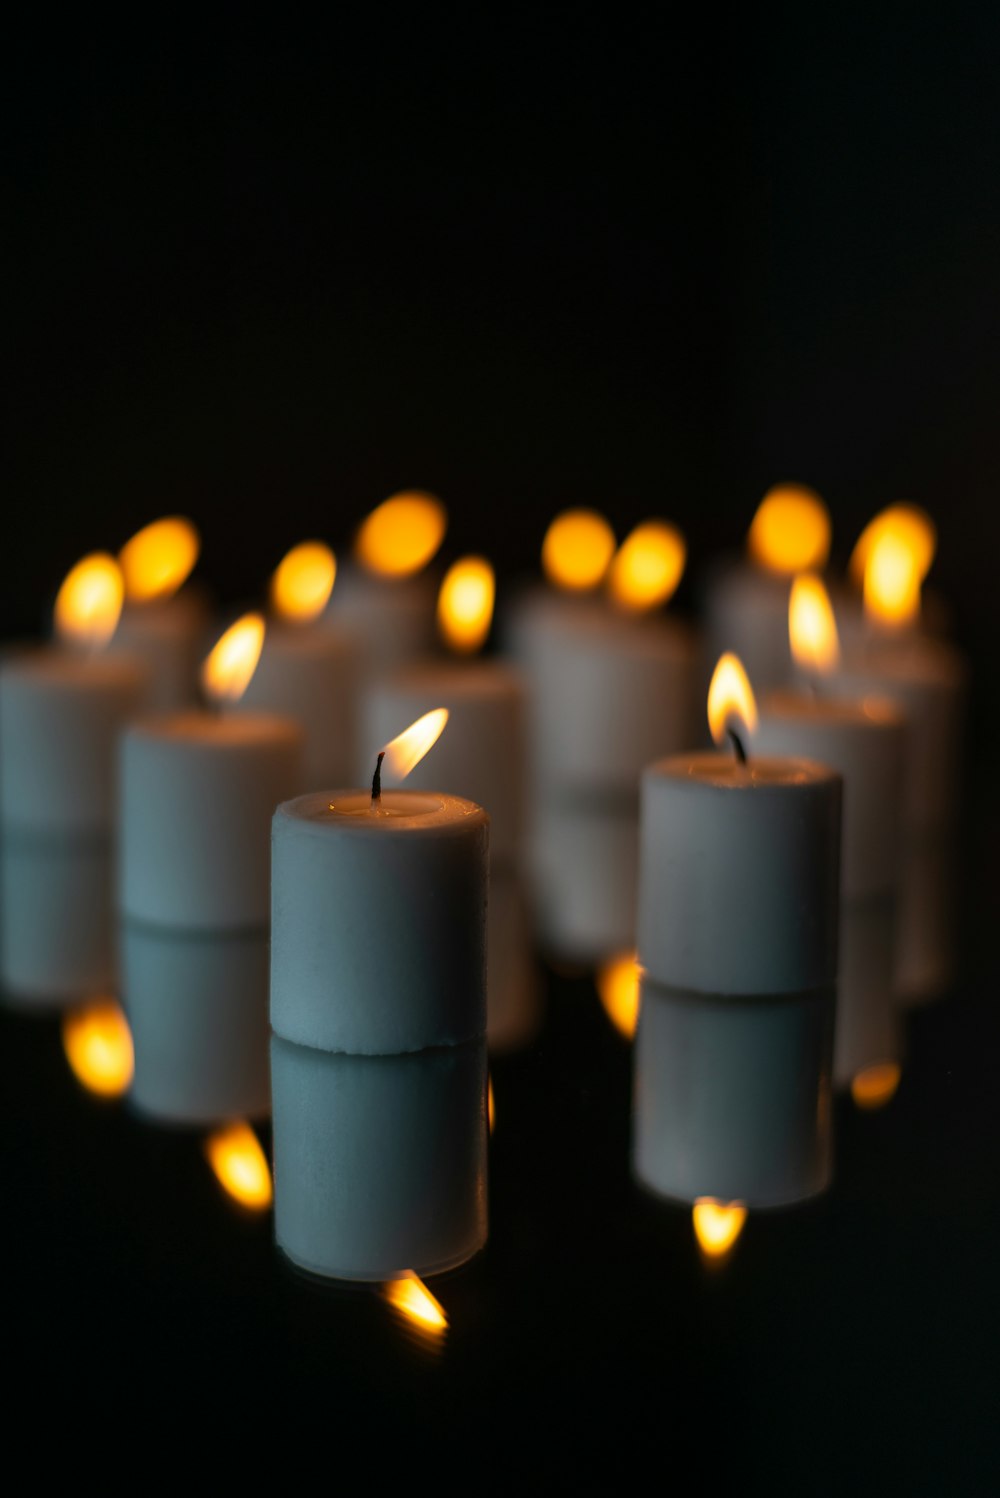 1500+ Candle With Black Background Pictures | Download Free Images ...